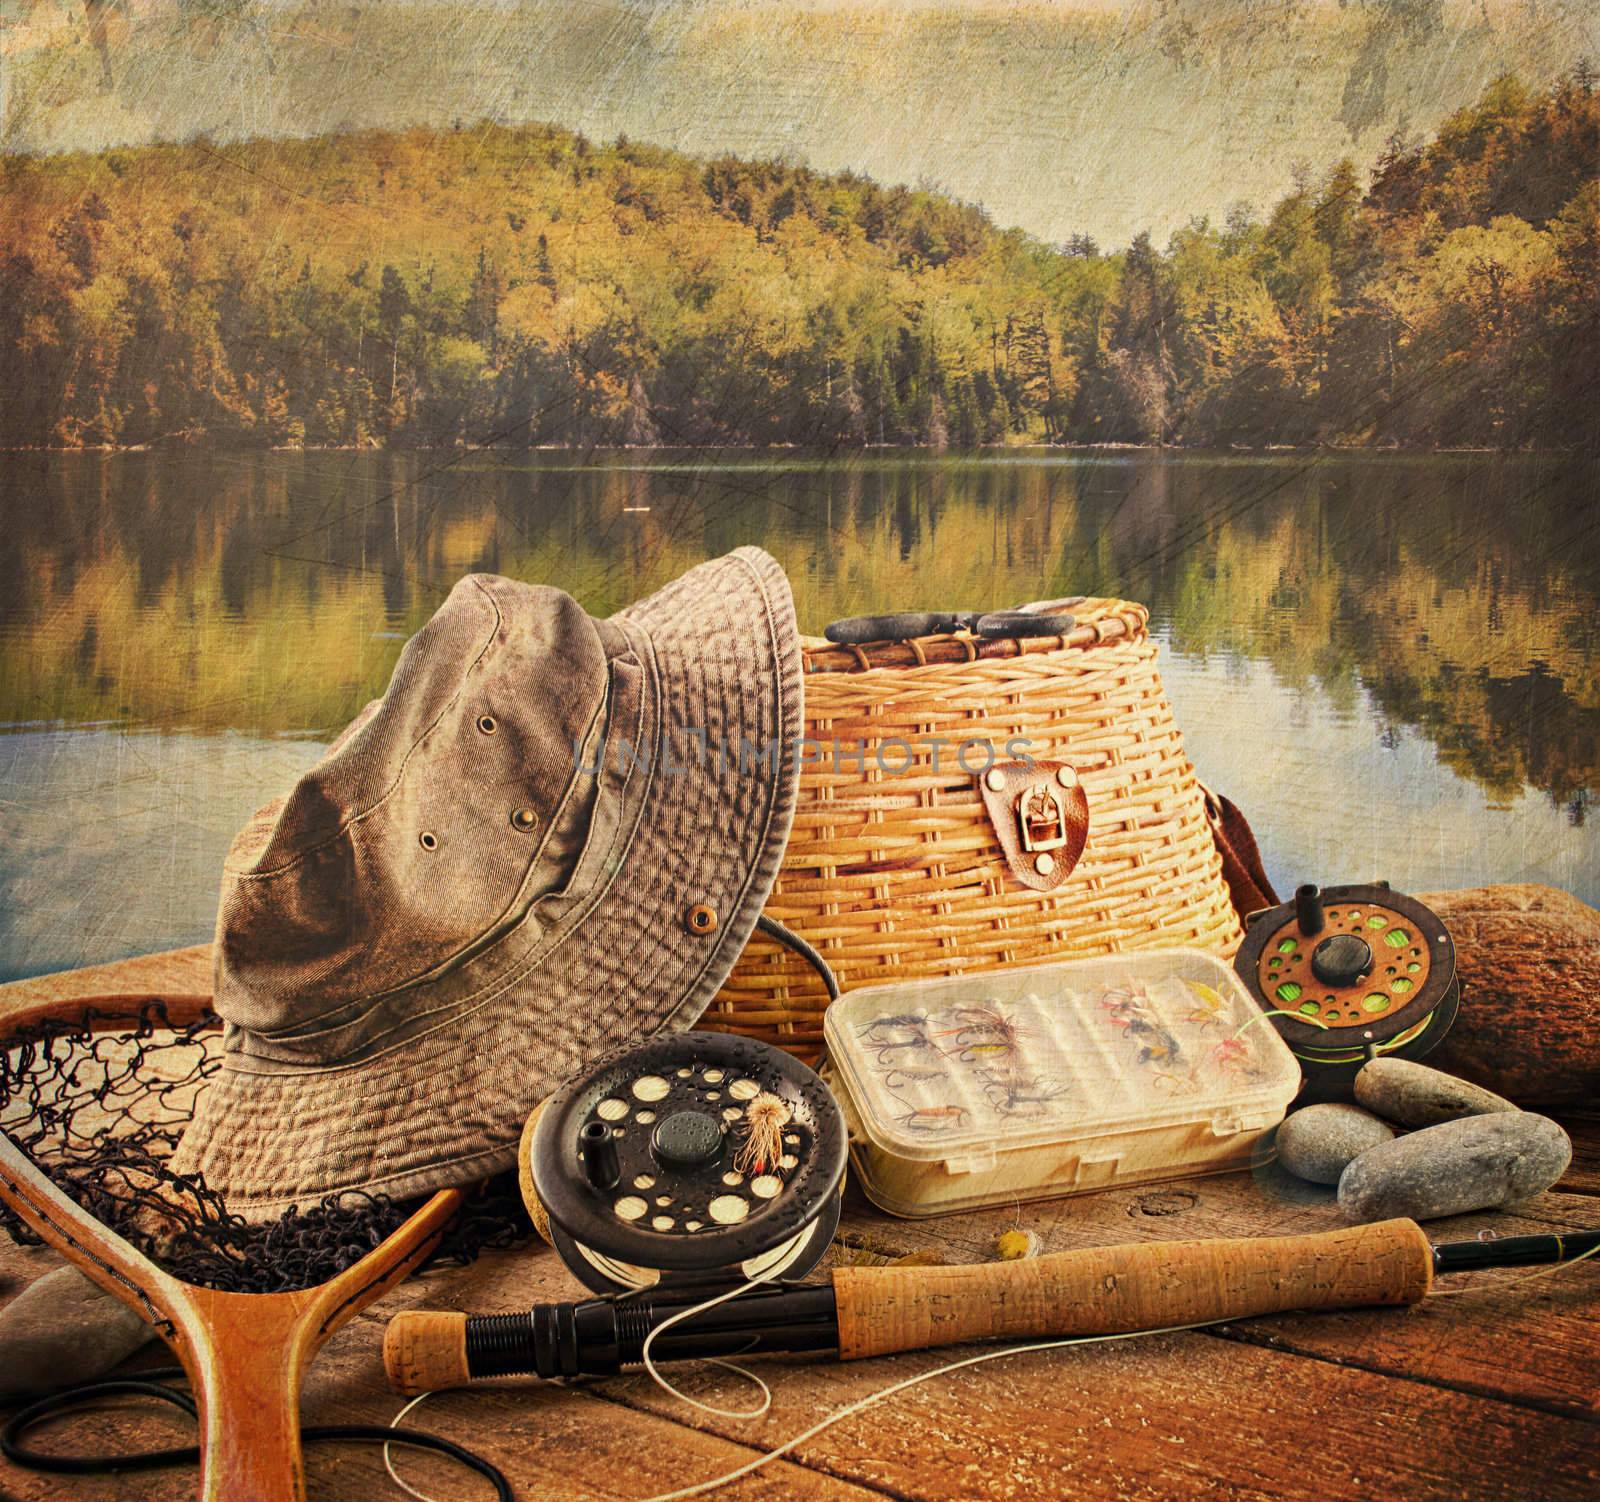 Fly fishing equipment  with vintage look by Sandralise